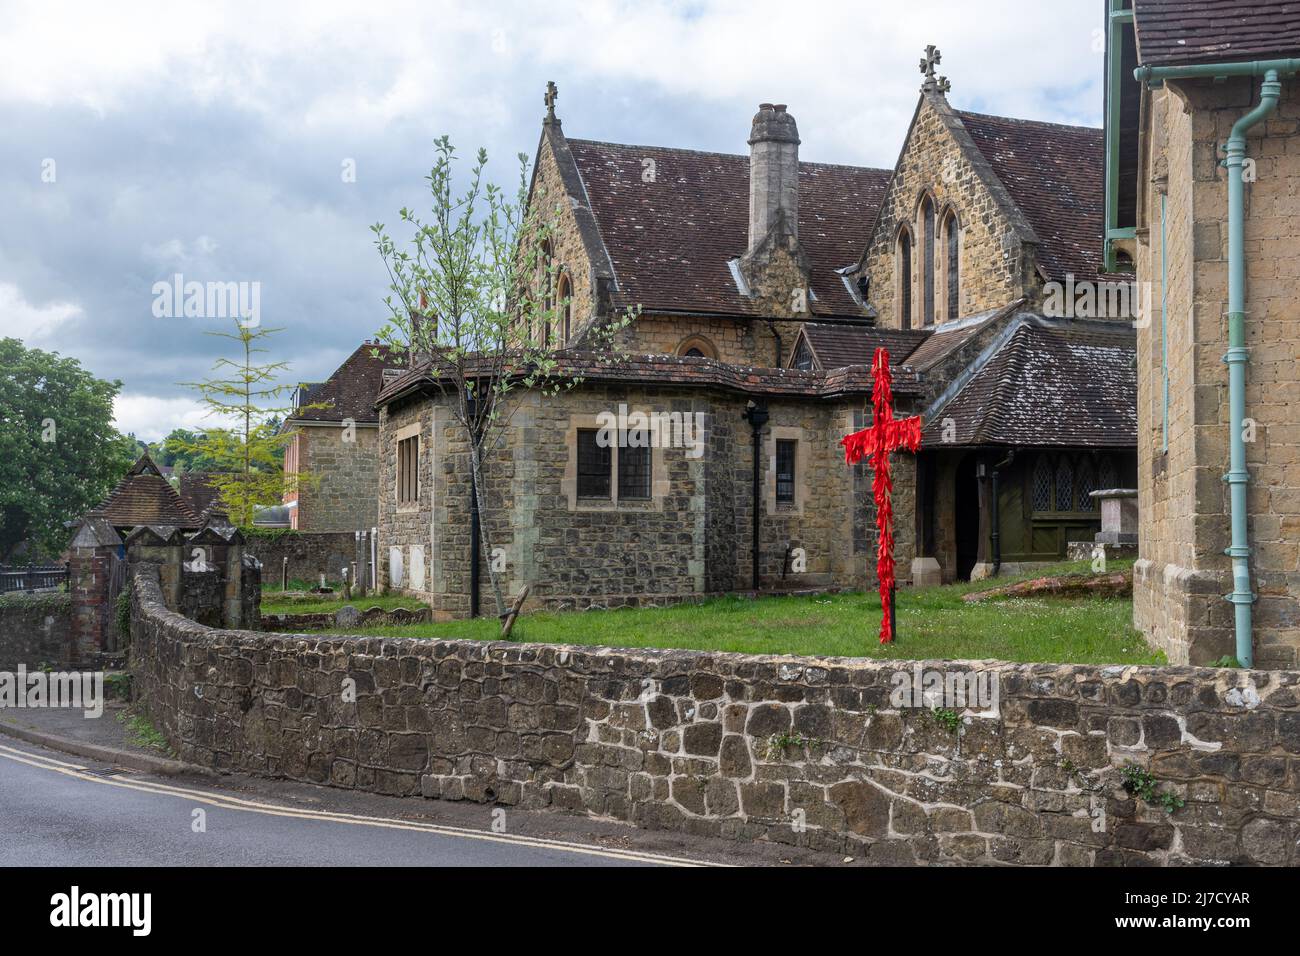 St Bartholomew's Church in Haslemere, Surrey, England, UK, with cross decorated with red ribbons for Easter Stock Photo